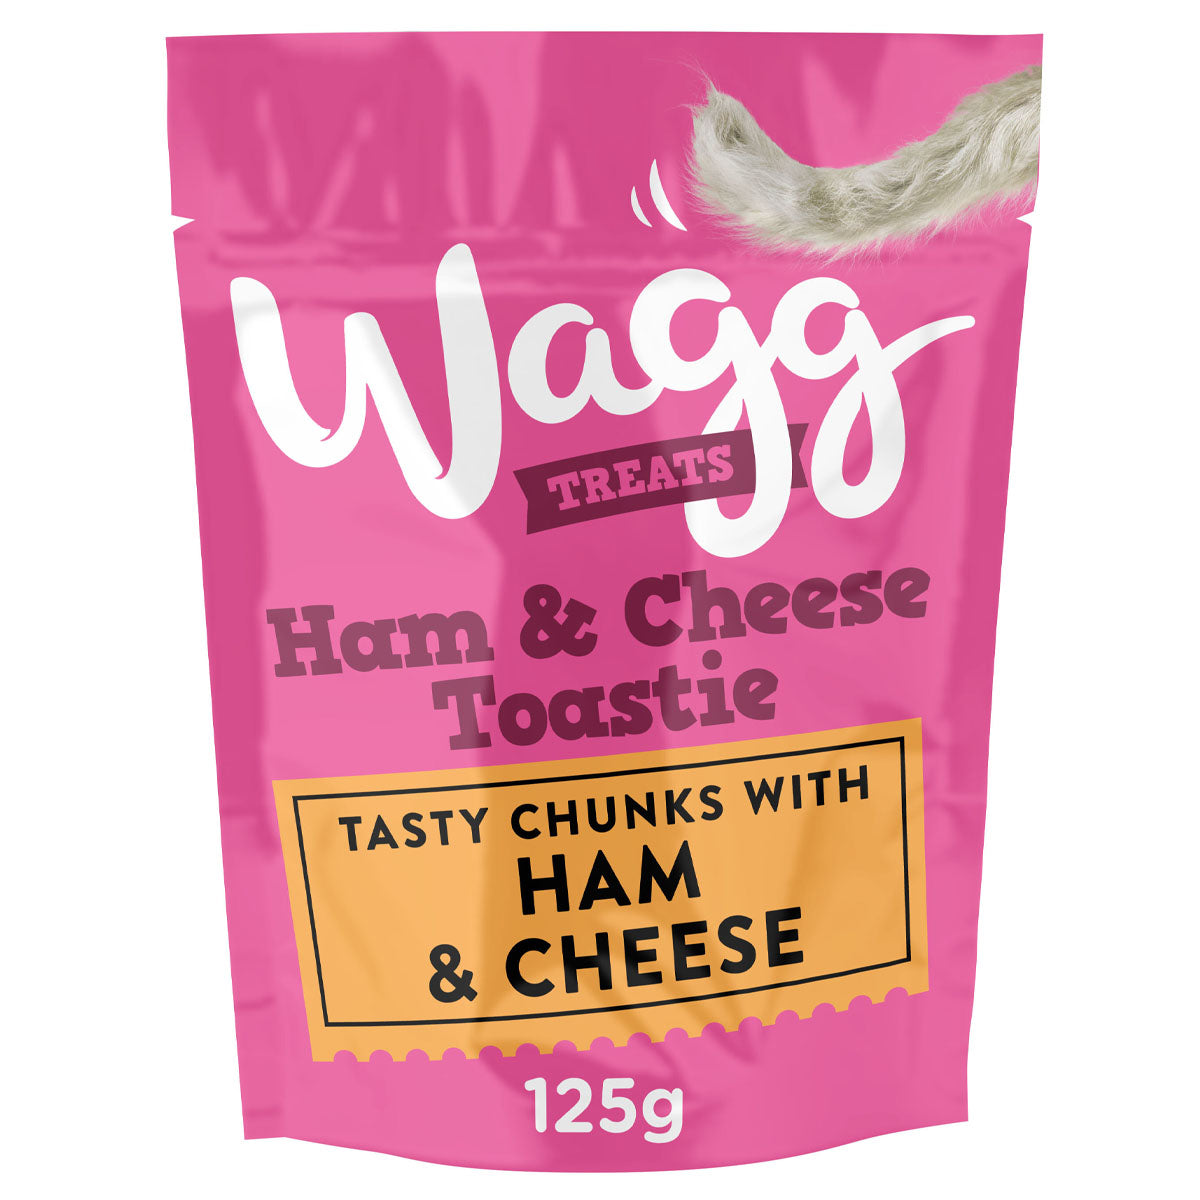 Wagg - Ham and Cheese Toastie Treats - 125g - Continental Food Store